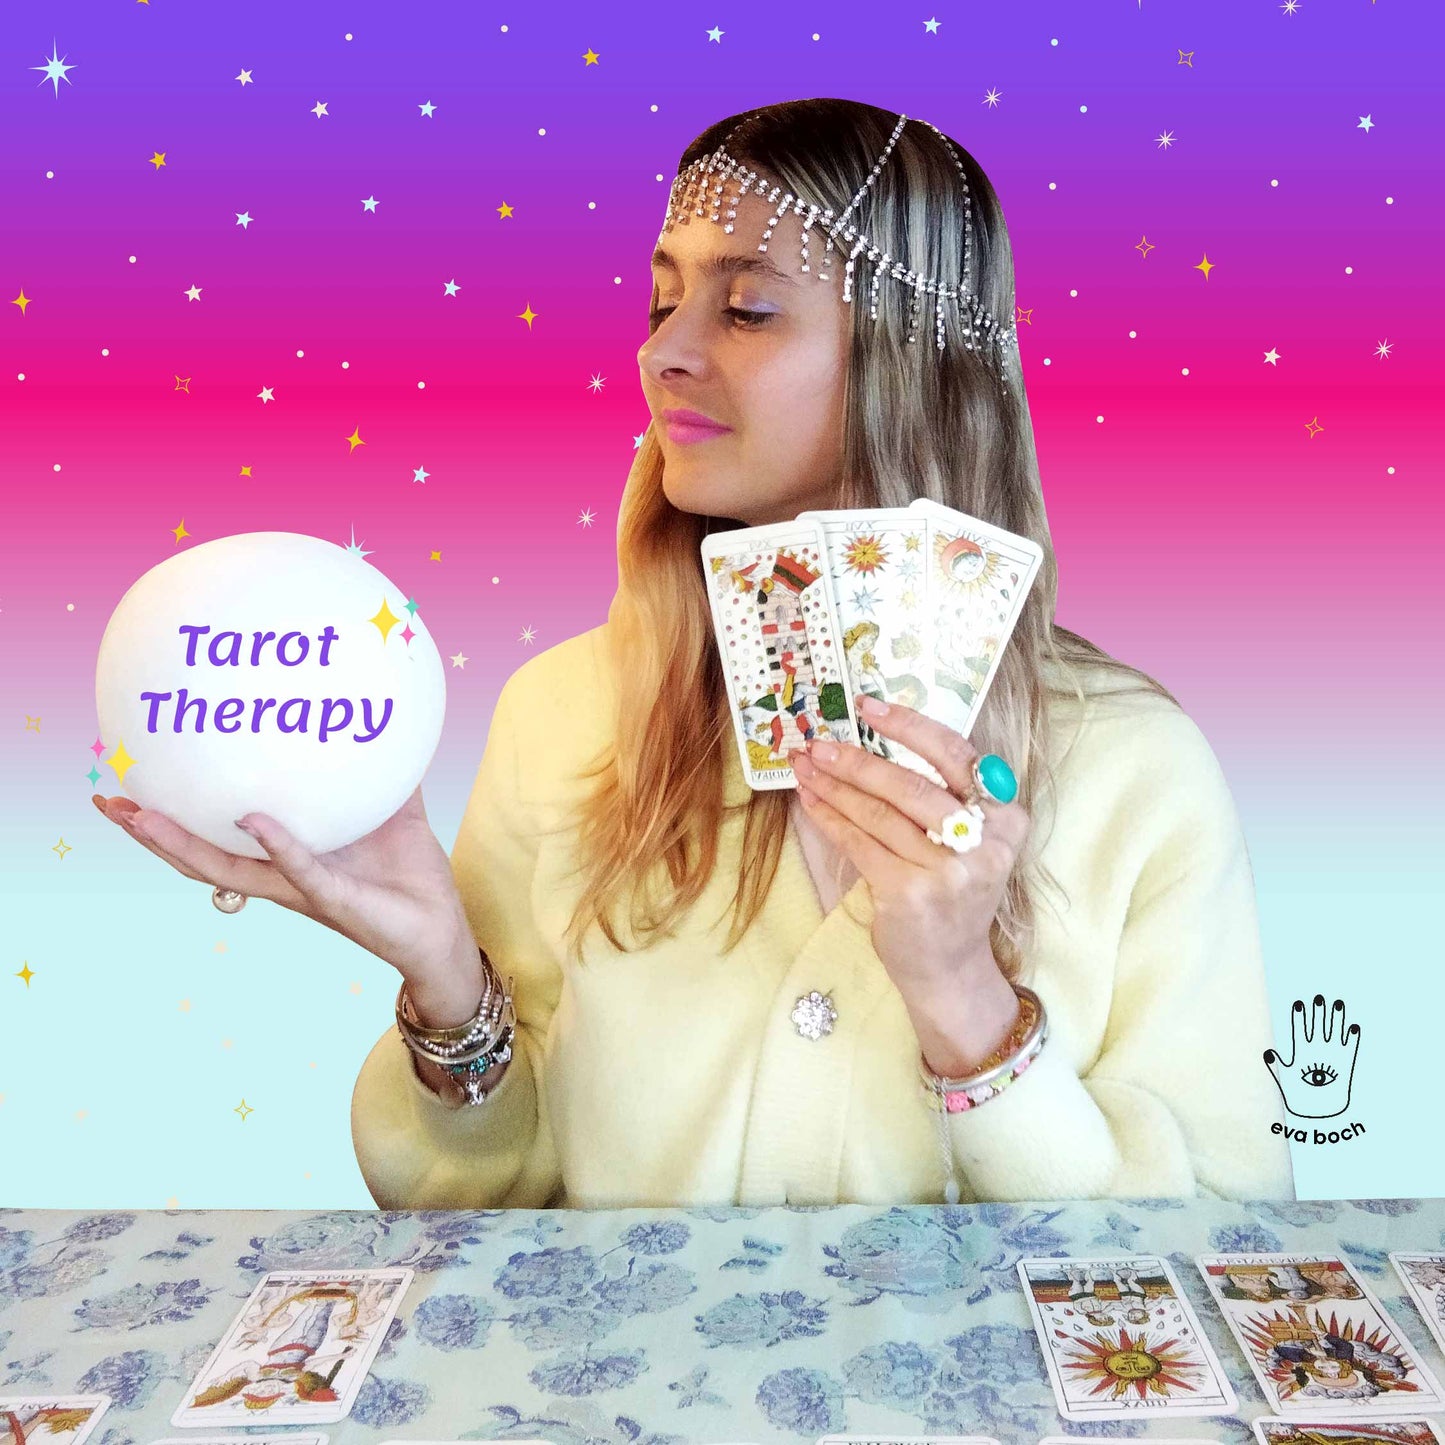 Spiritual Tarot Reading | Within 24 Hours From Purchase